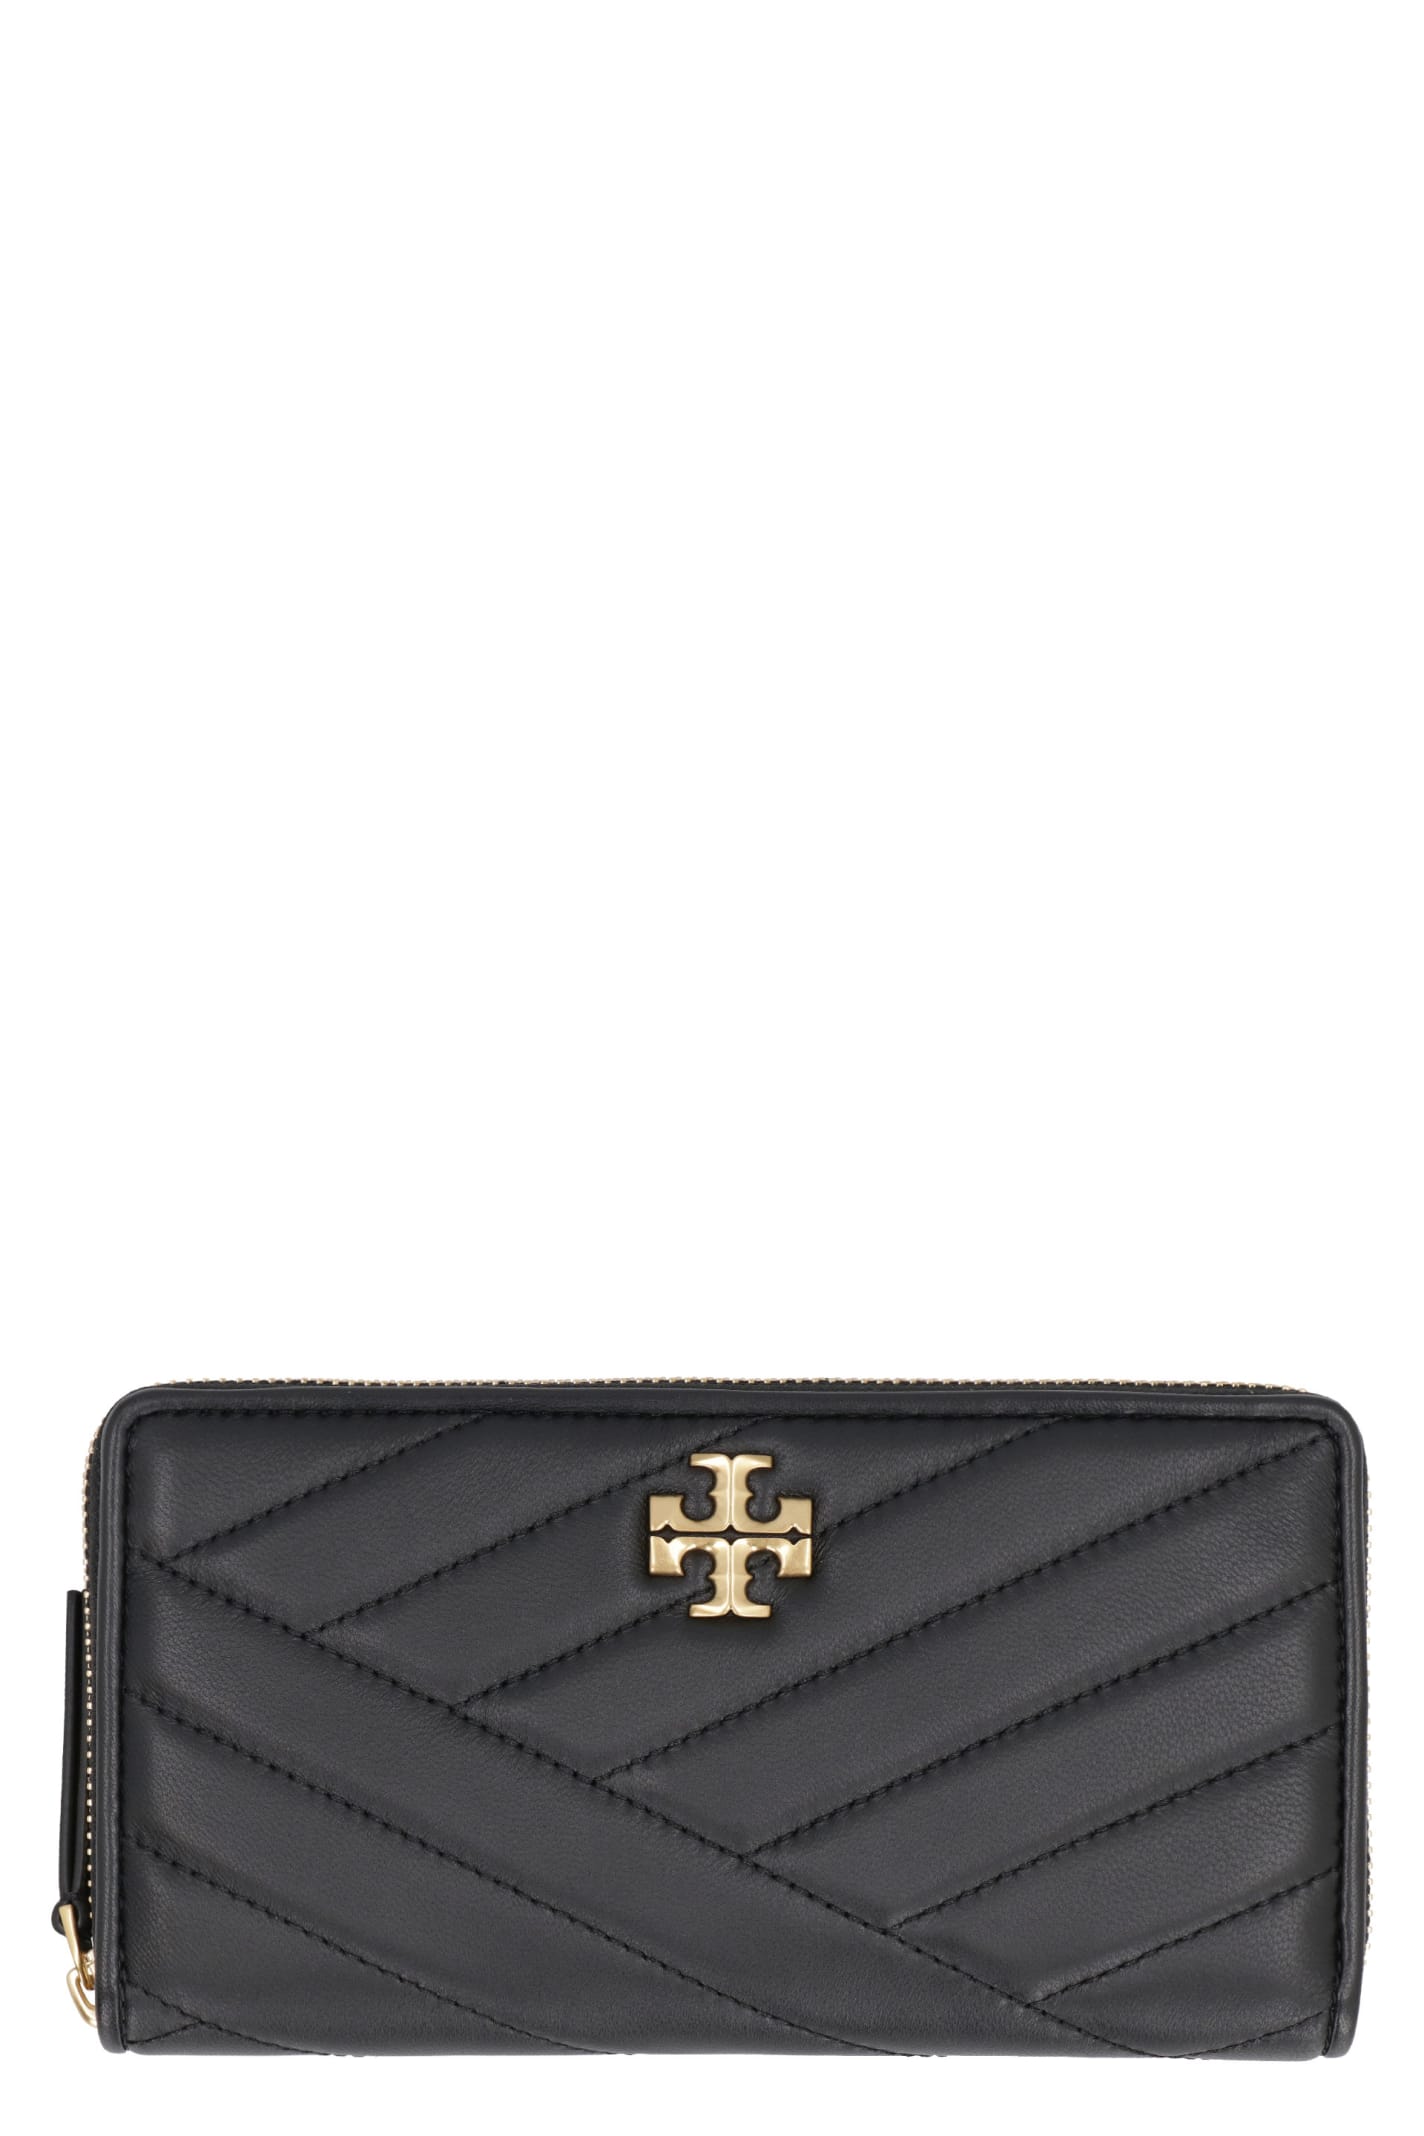 Shop Tory Burch Kira Continental Leather Wallet In Black